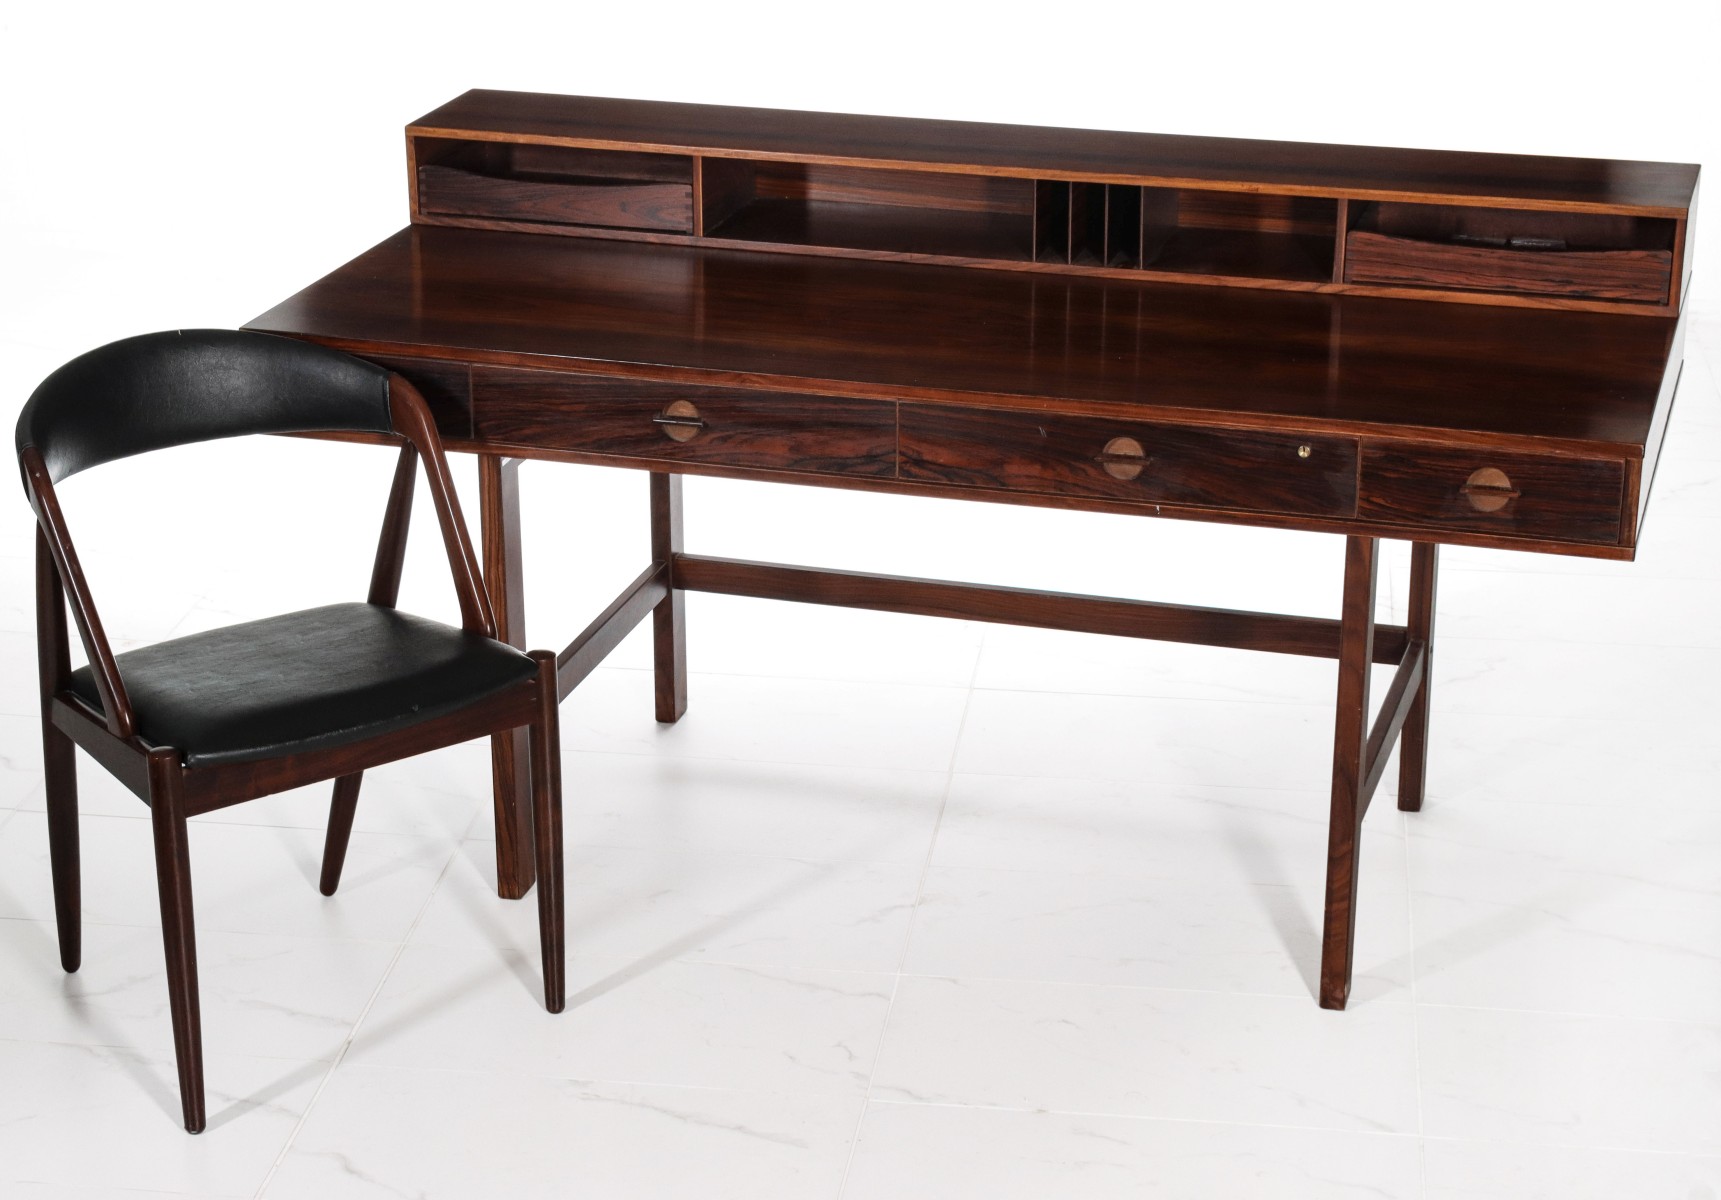 PETER LOVIG AND KAI KRISTIANSEN ROSEWOOD DESK AND CHAIR